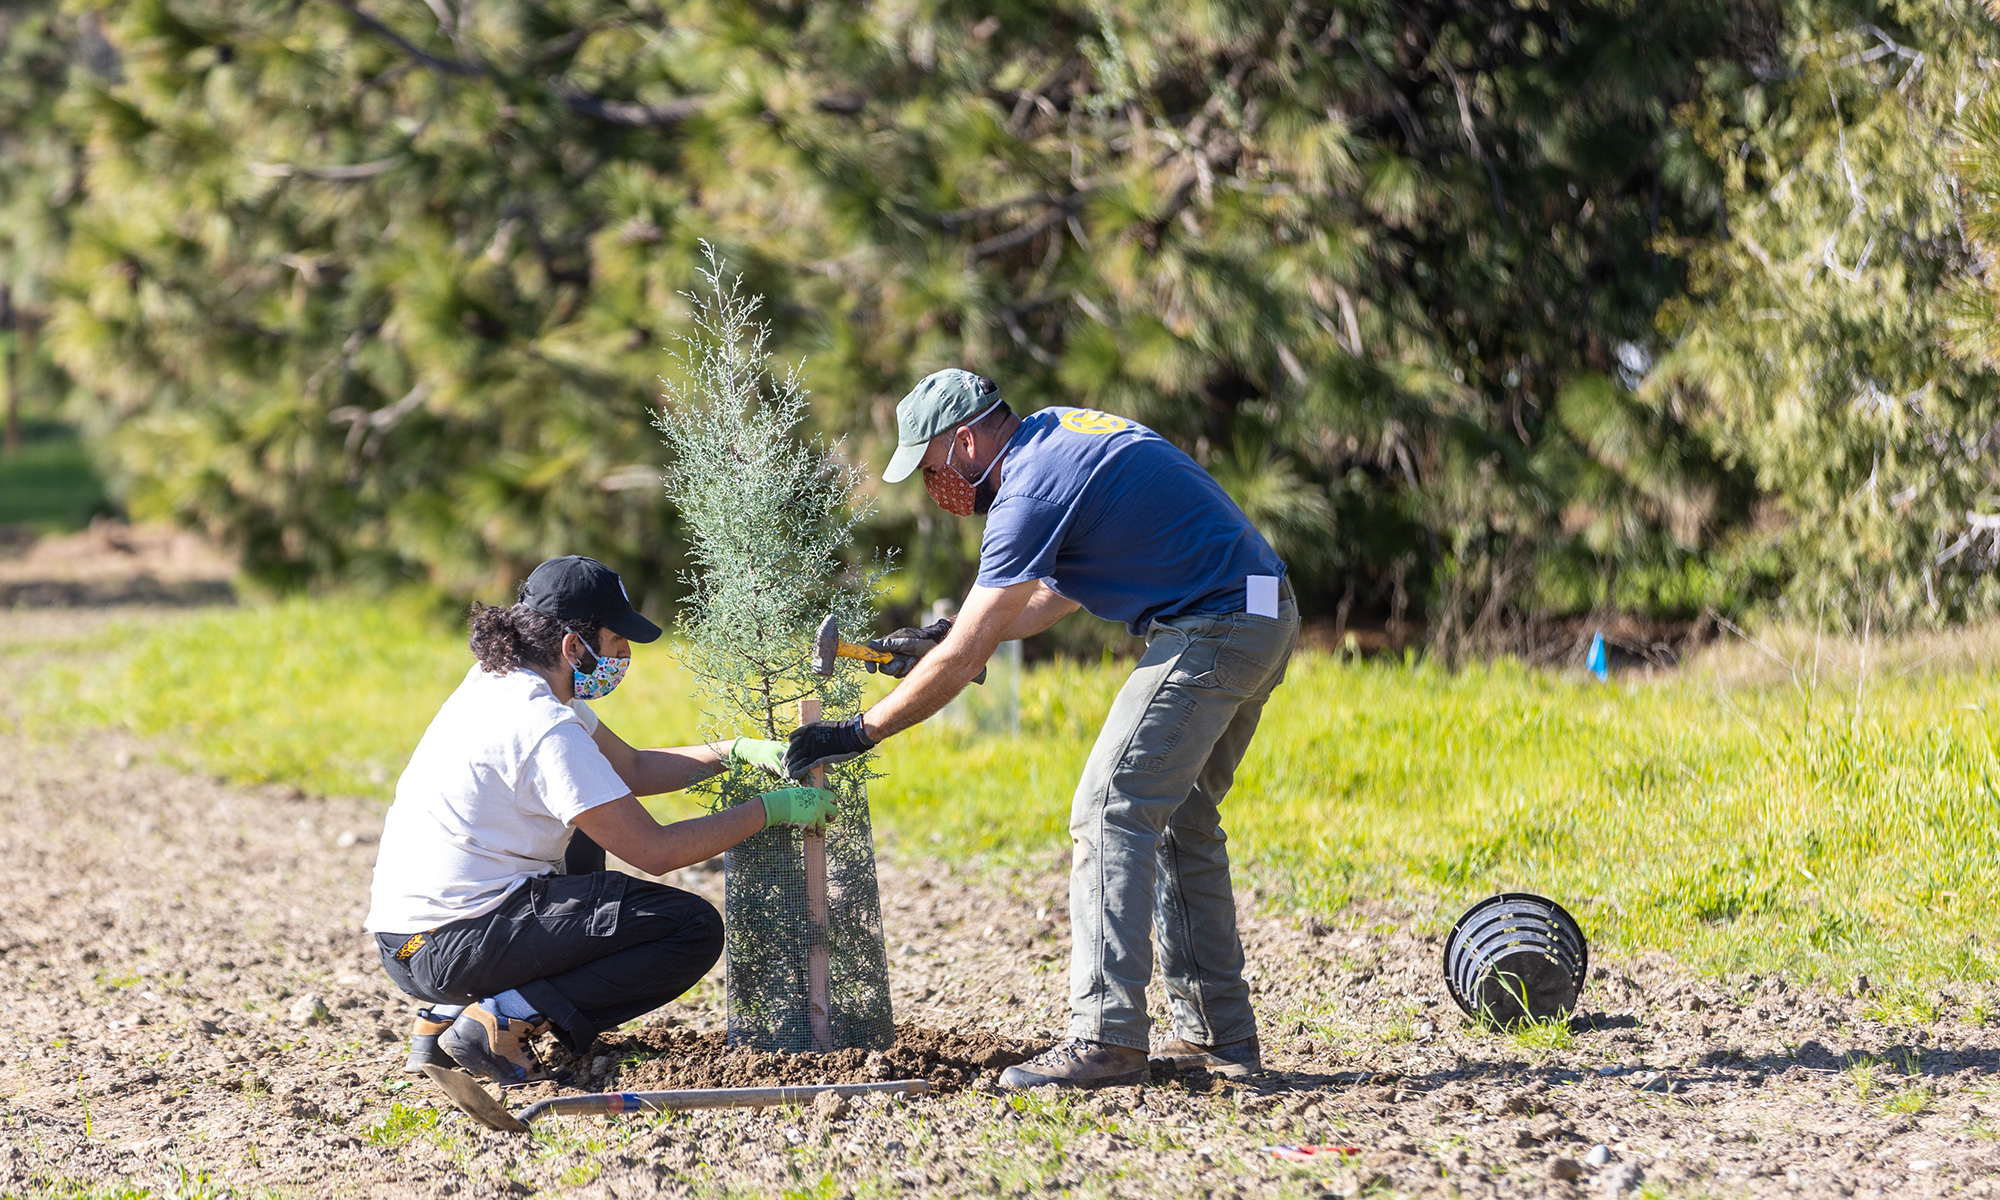 Planting trees at the experiment site